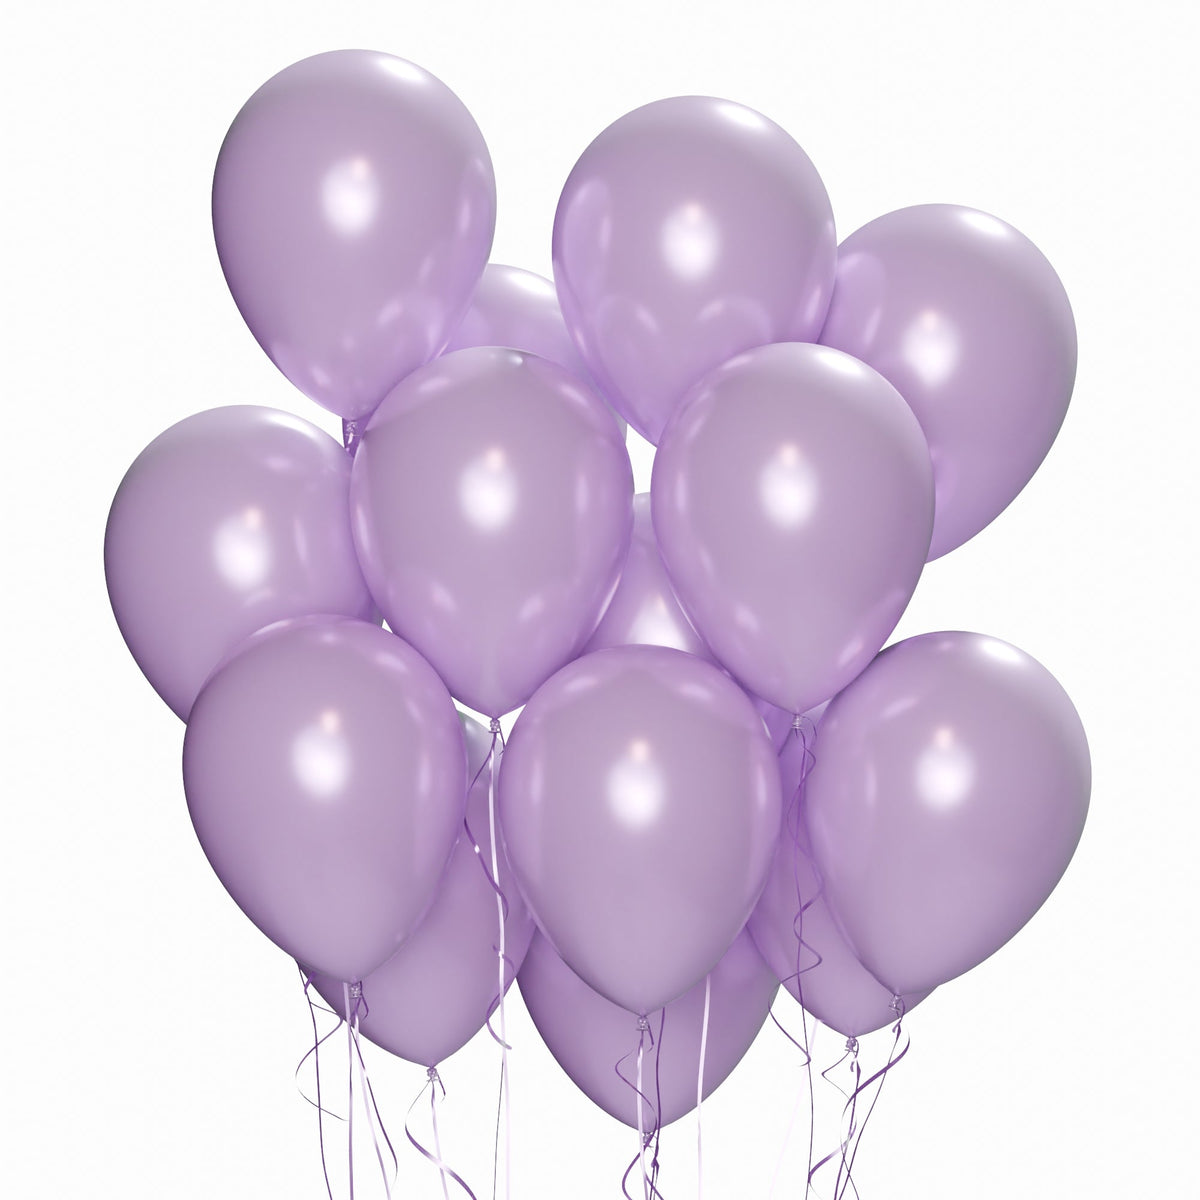 WIDE OCEAN INTERNATIONAL TRADE BEIJING CO., LTD Balloons Lavender Latex Balloon 12 Inches, Pearl Collection, 15 Count 810064197772